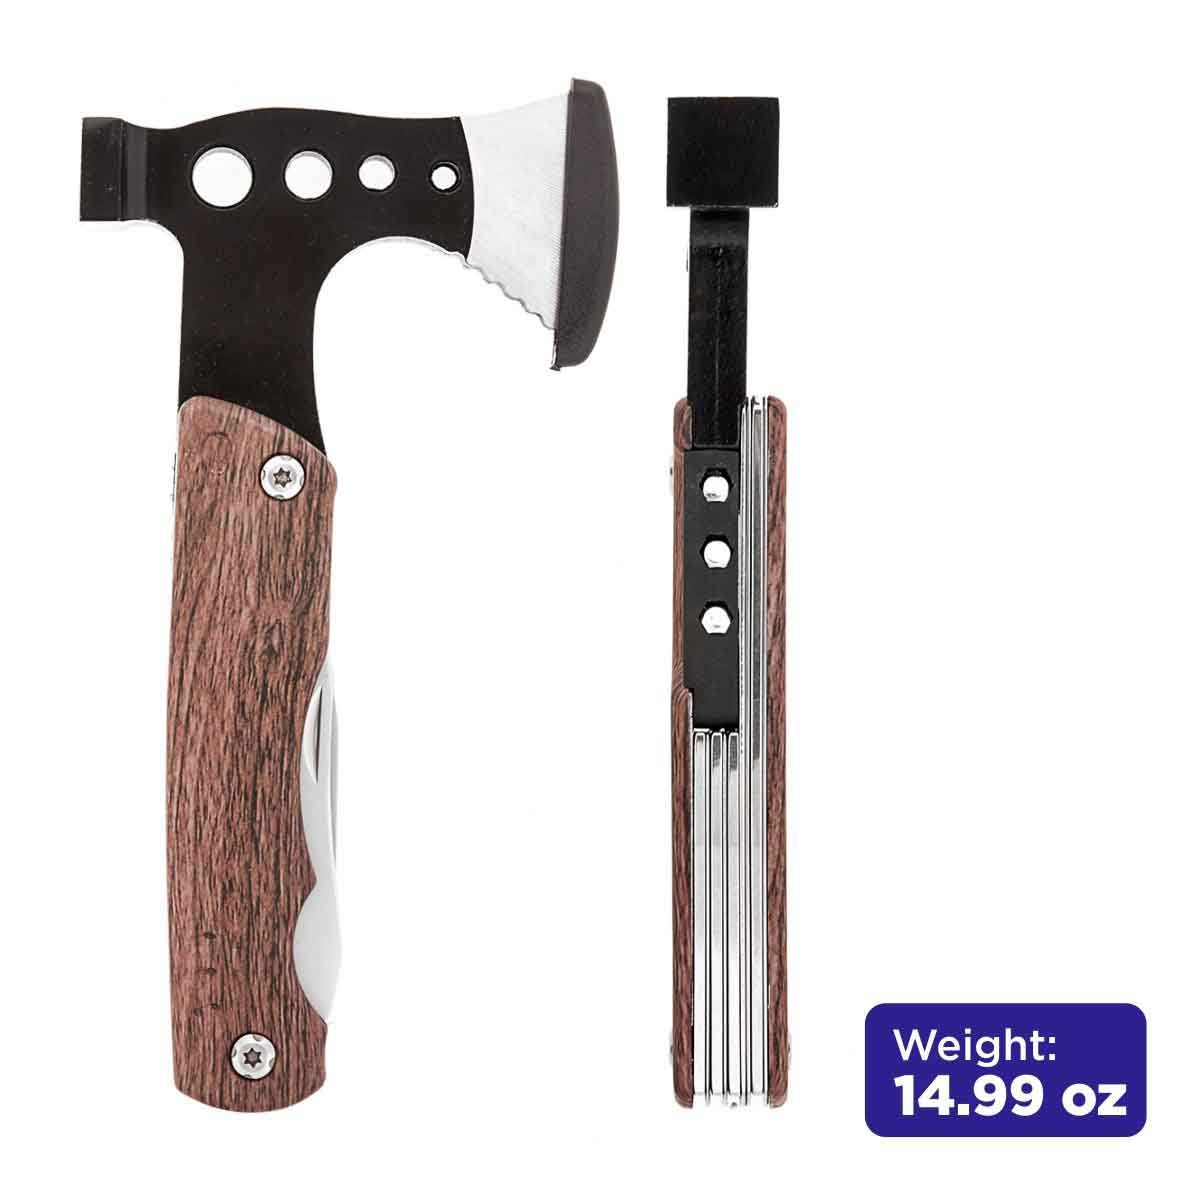 Portable 10-in-1 Axe Multitool for Home and Outdoor weighs 15 oz